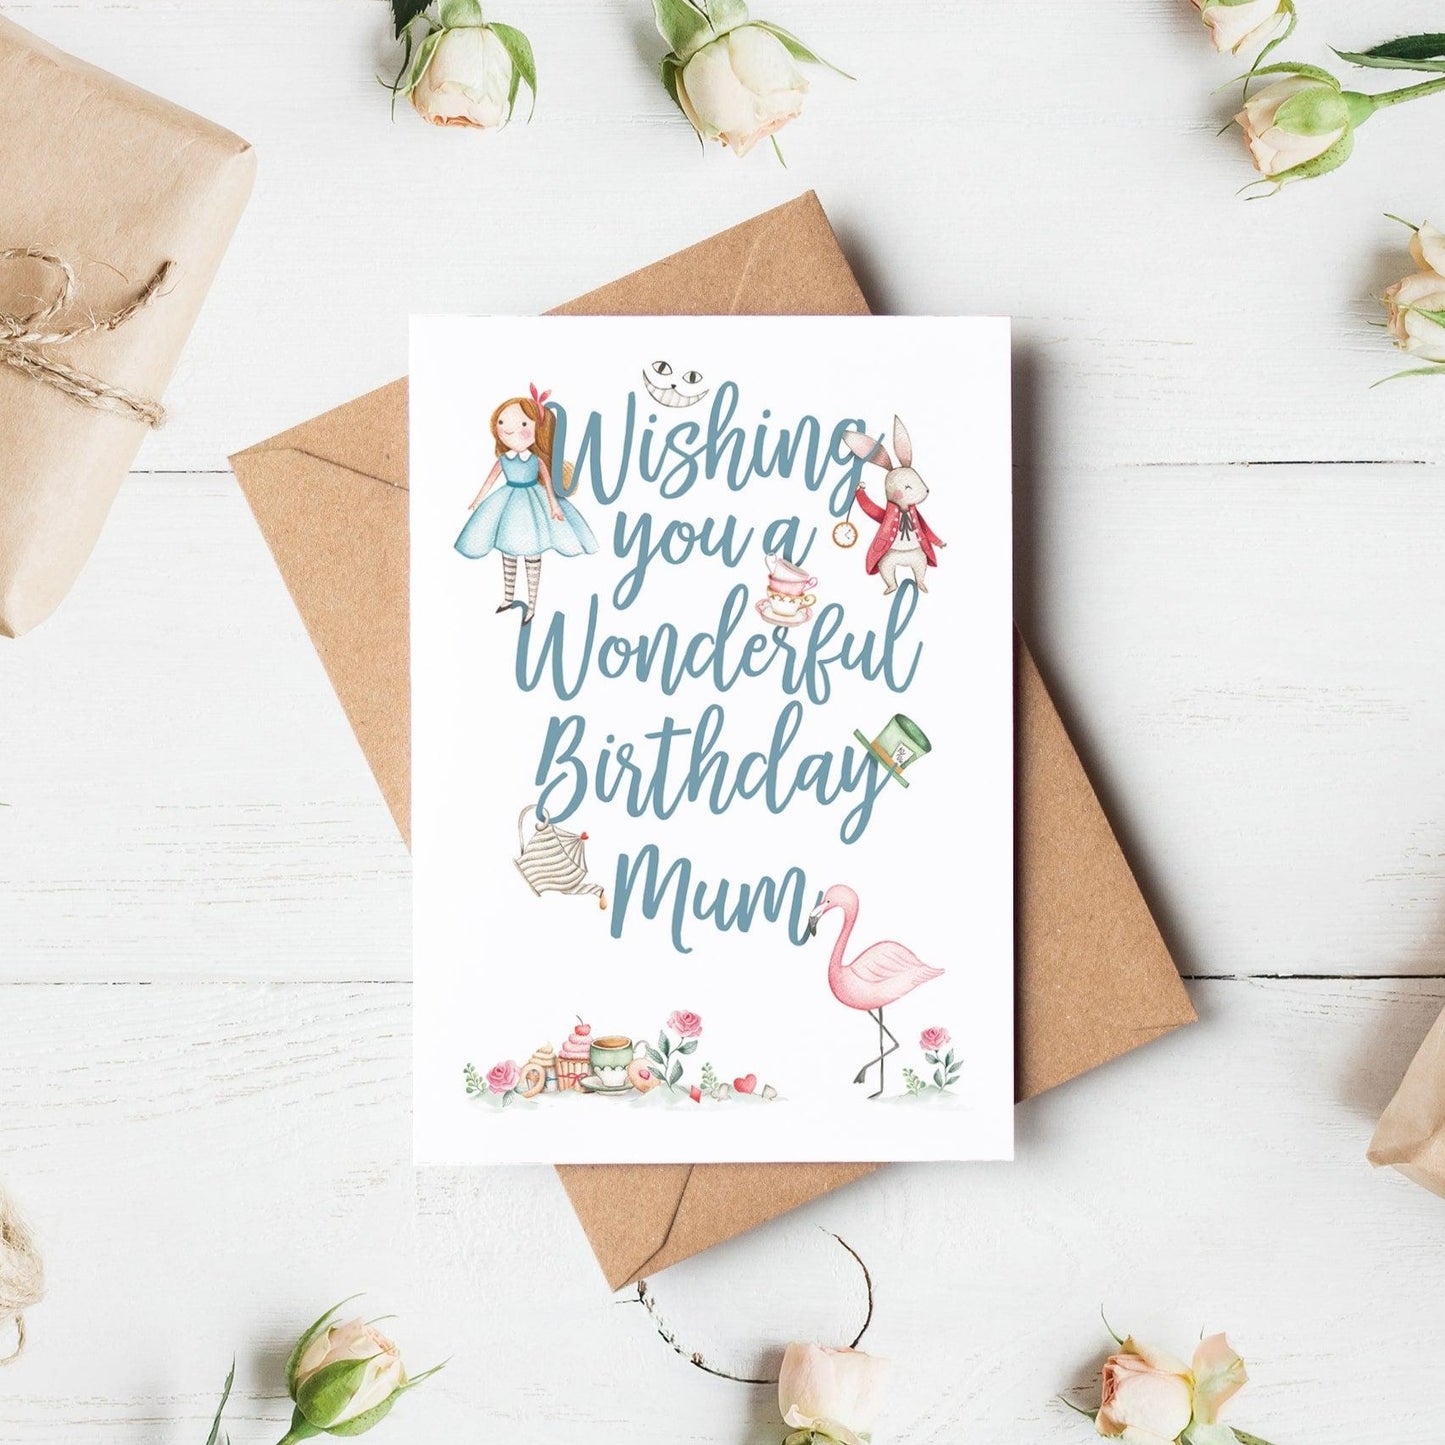 Alice in wonderland personalised birthday card with blue text